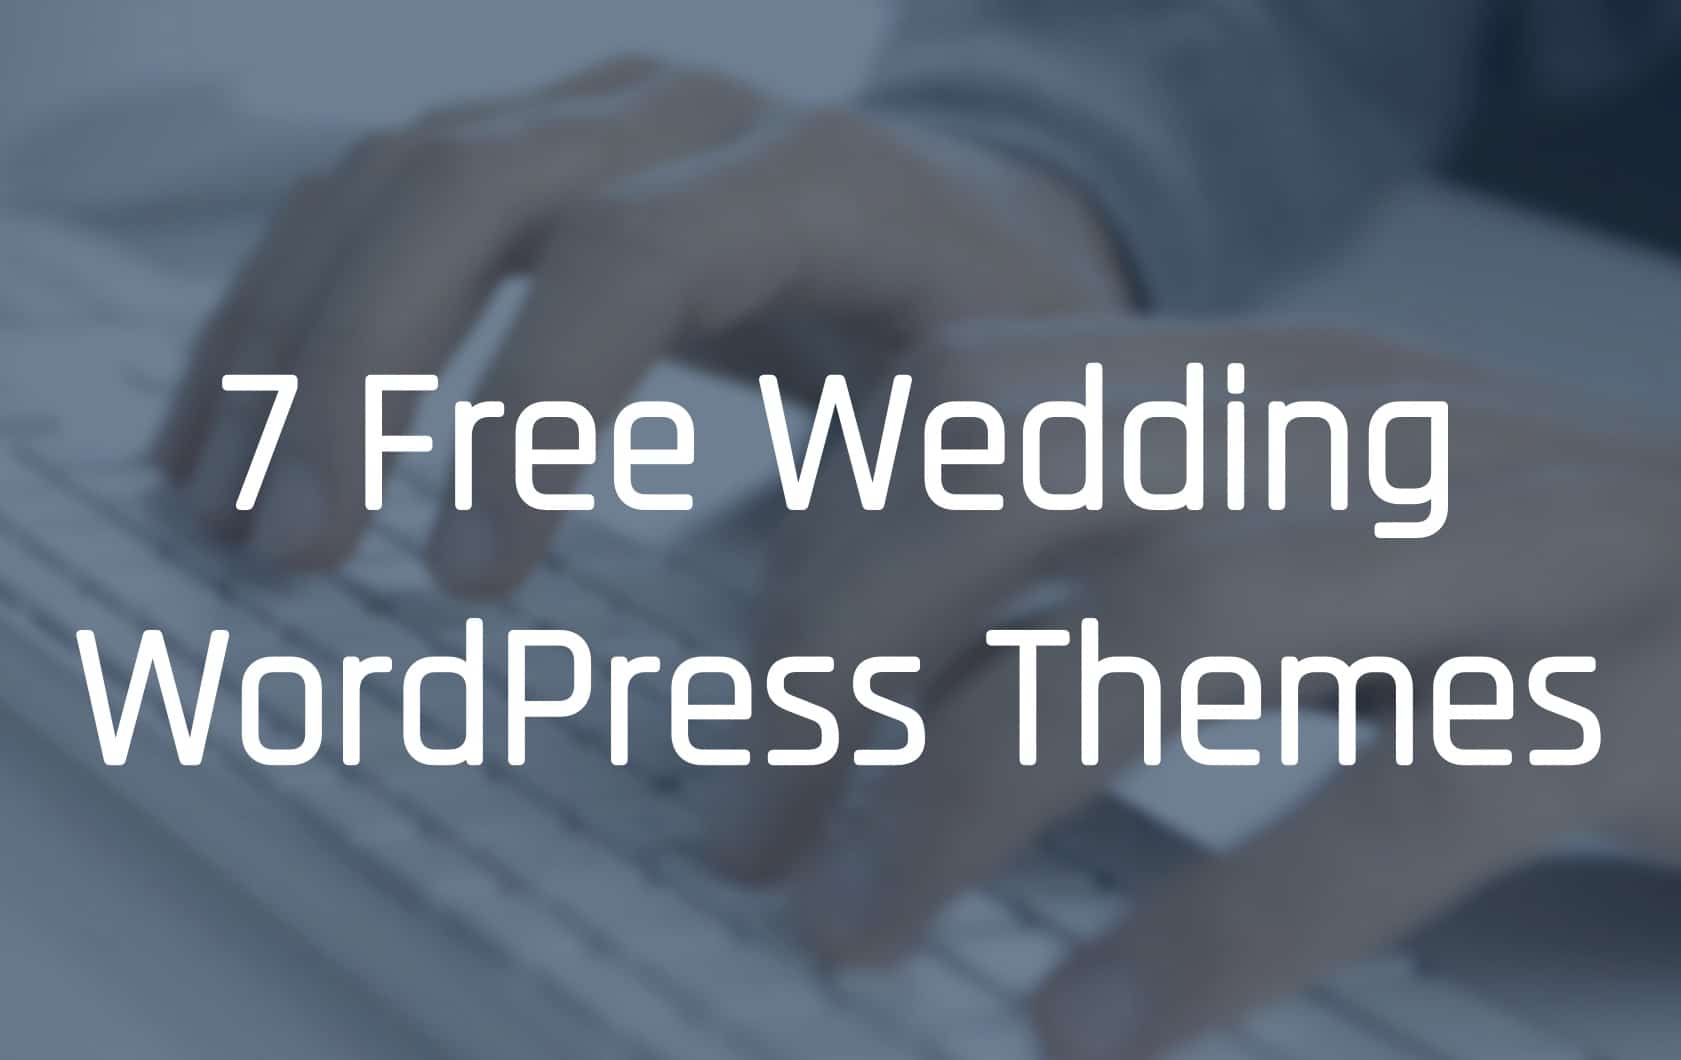 A keyboard is displaying a screenshot of text in a bold font, showcasing seven free wedding WordPress themes.